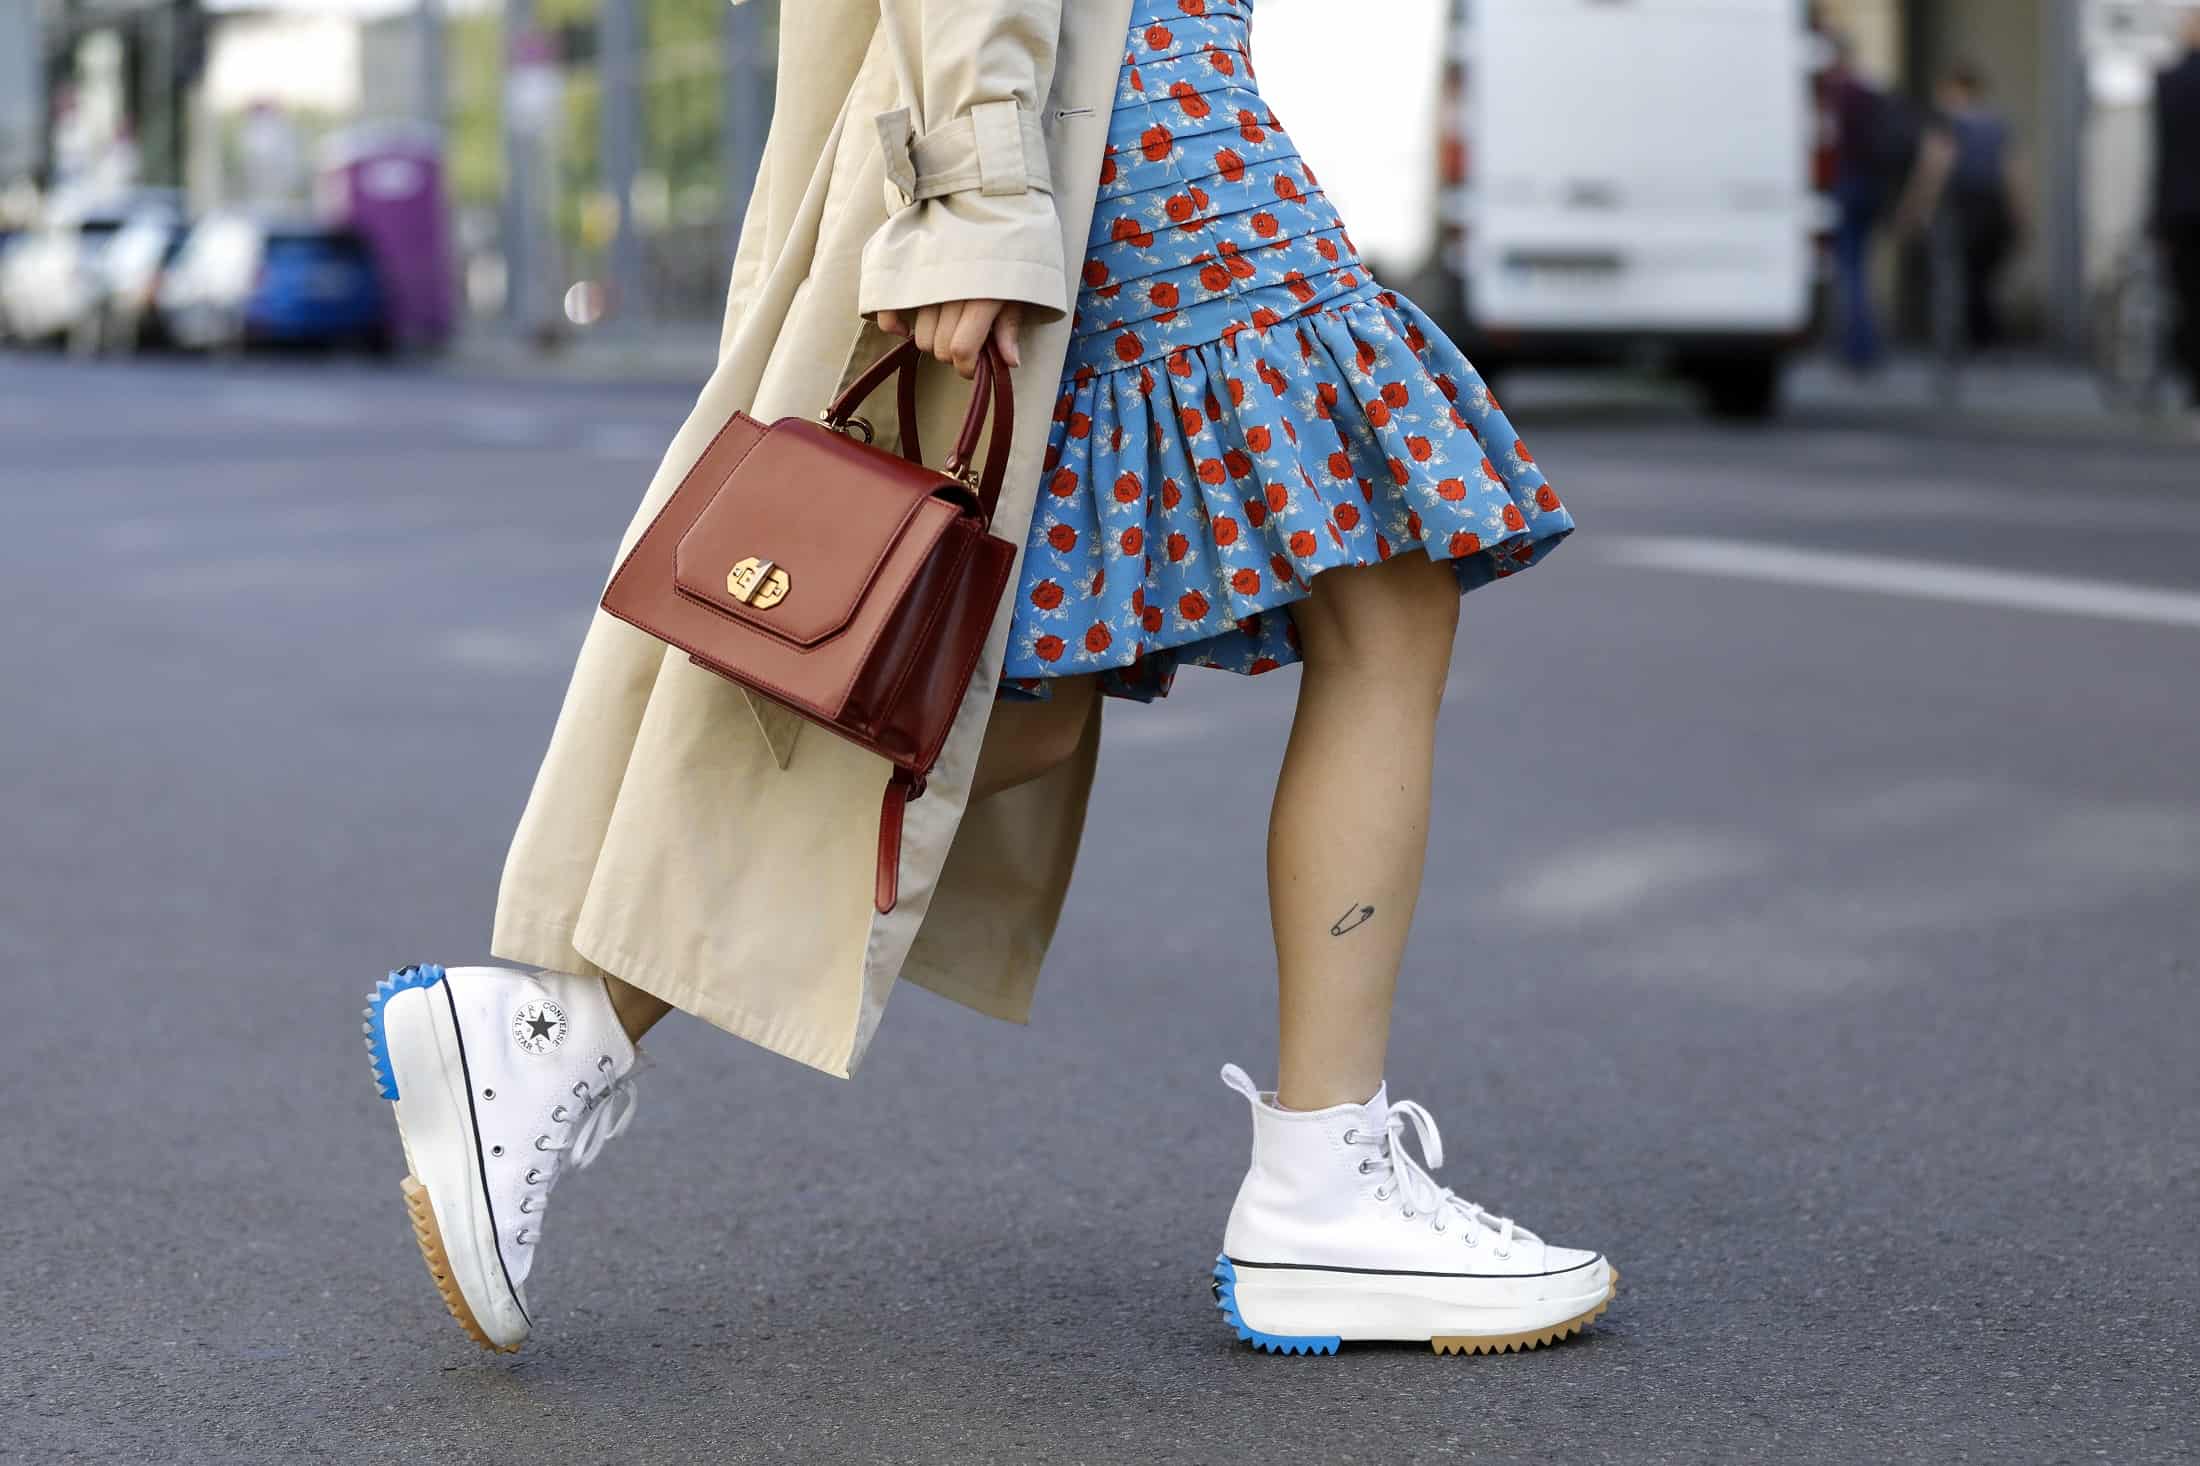 Opt for a dress and sneakers this summer! Get inspired and create your own style by going bold with this iconic trend